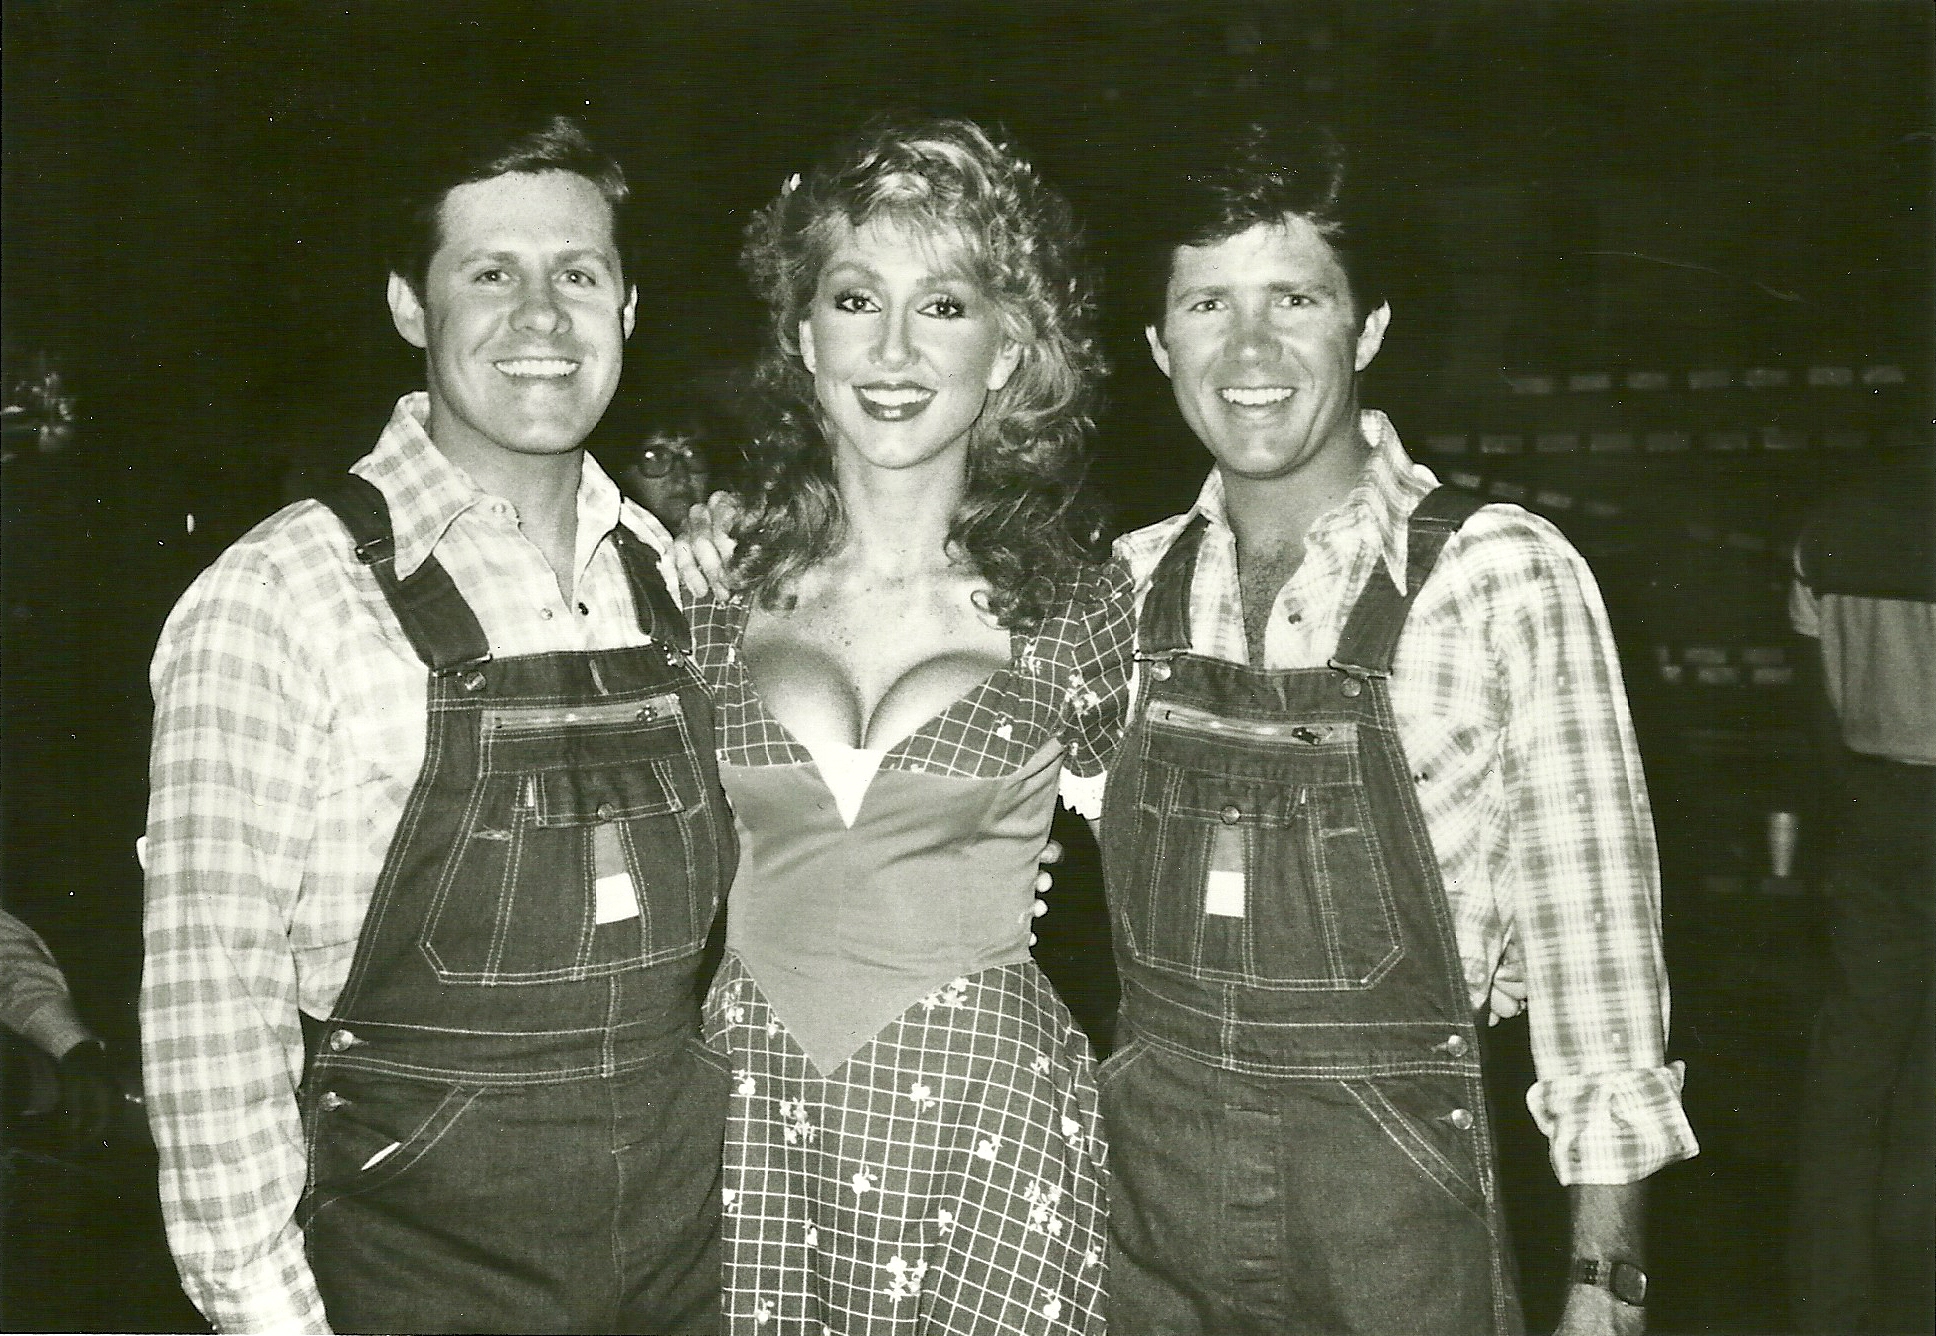 Ben McCain, Hee Haw Honey Linda Thompson and Butch McCain on the set of Hee Haw in Nashville.